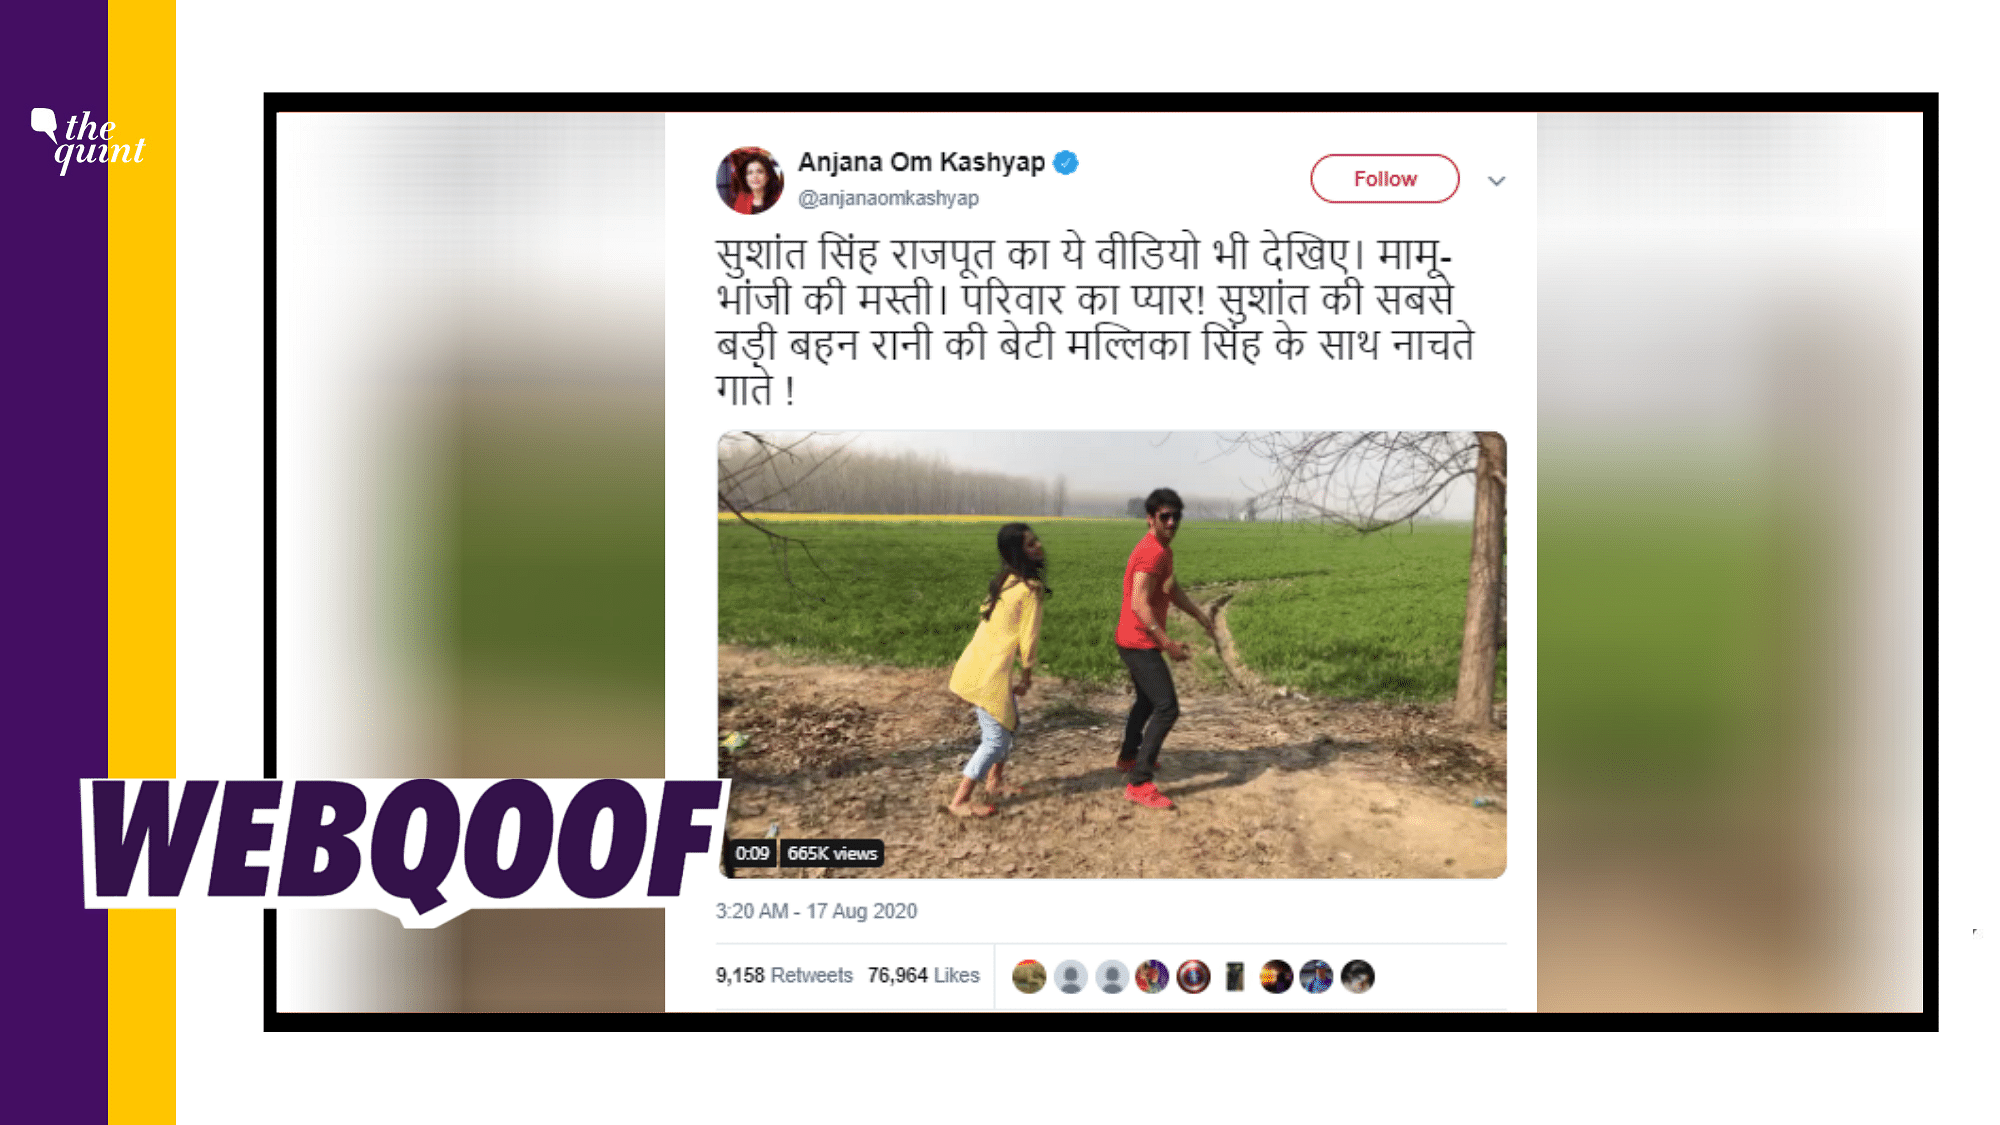 A viral video showing Sushant Singh Rajput dancing on Madhuri Dixit’s song ‘Chane Ke Khet Mein’ has been doing the rounds on social media with the claim that the woman in the video is his niece.